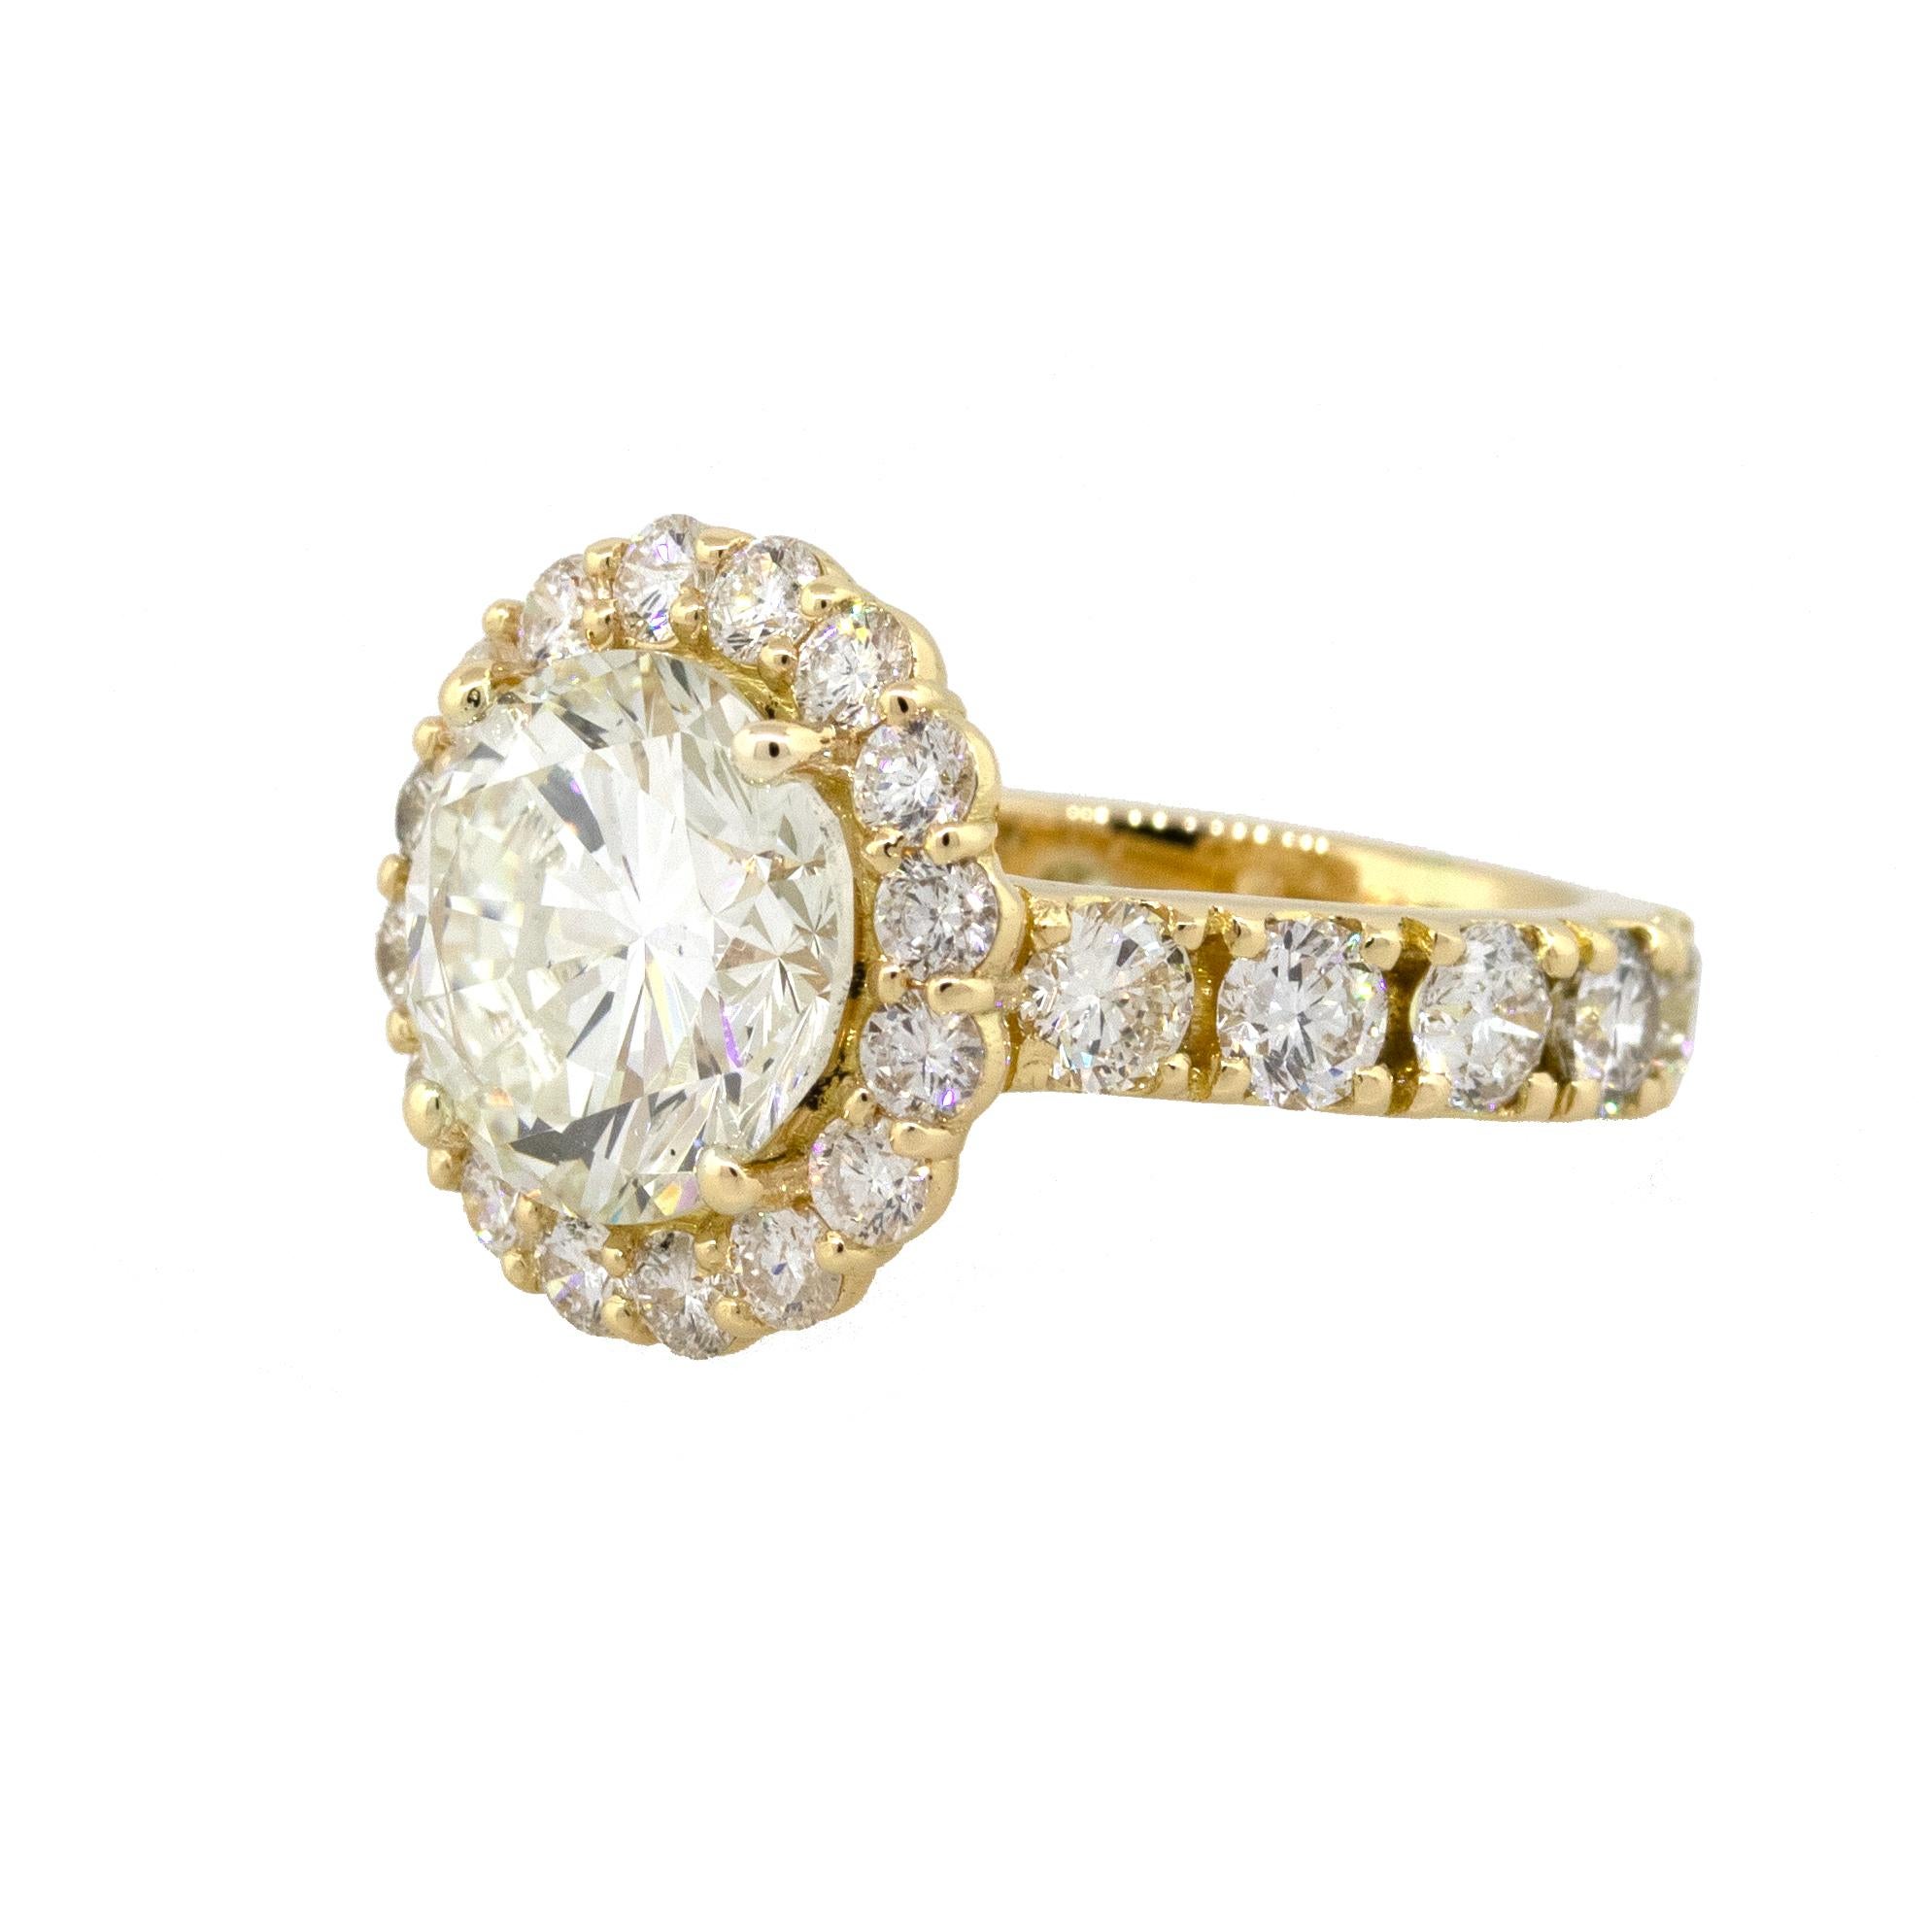 Material: 18k Yellow Gold
Center Diamond Details: 4.02ct Round Brilliant Diamond is K in color and VS2 in clarity
GIA Report Number: 2195825650
Adjacent Diamond Details: Approximately 1.85ctw of Round Cut Diamonds. Diamonds are G/H in color and SI